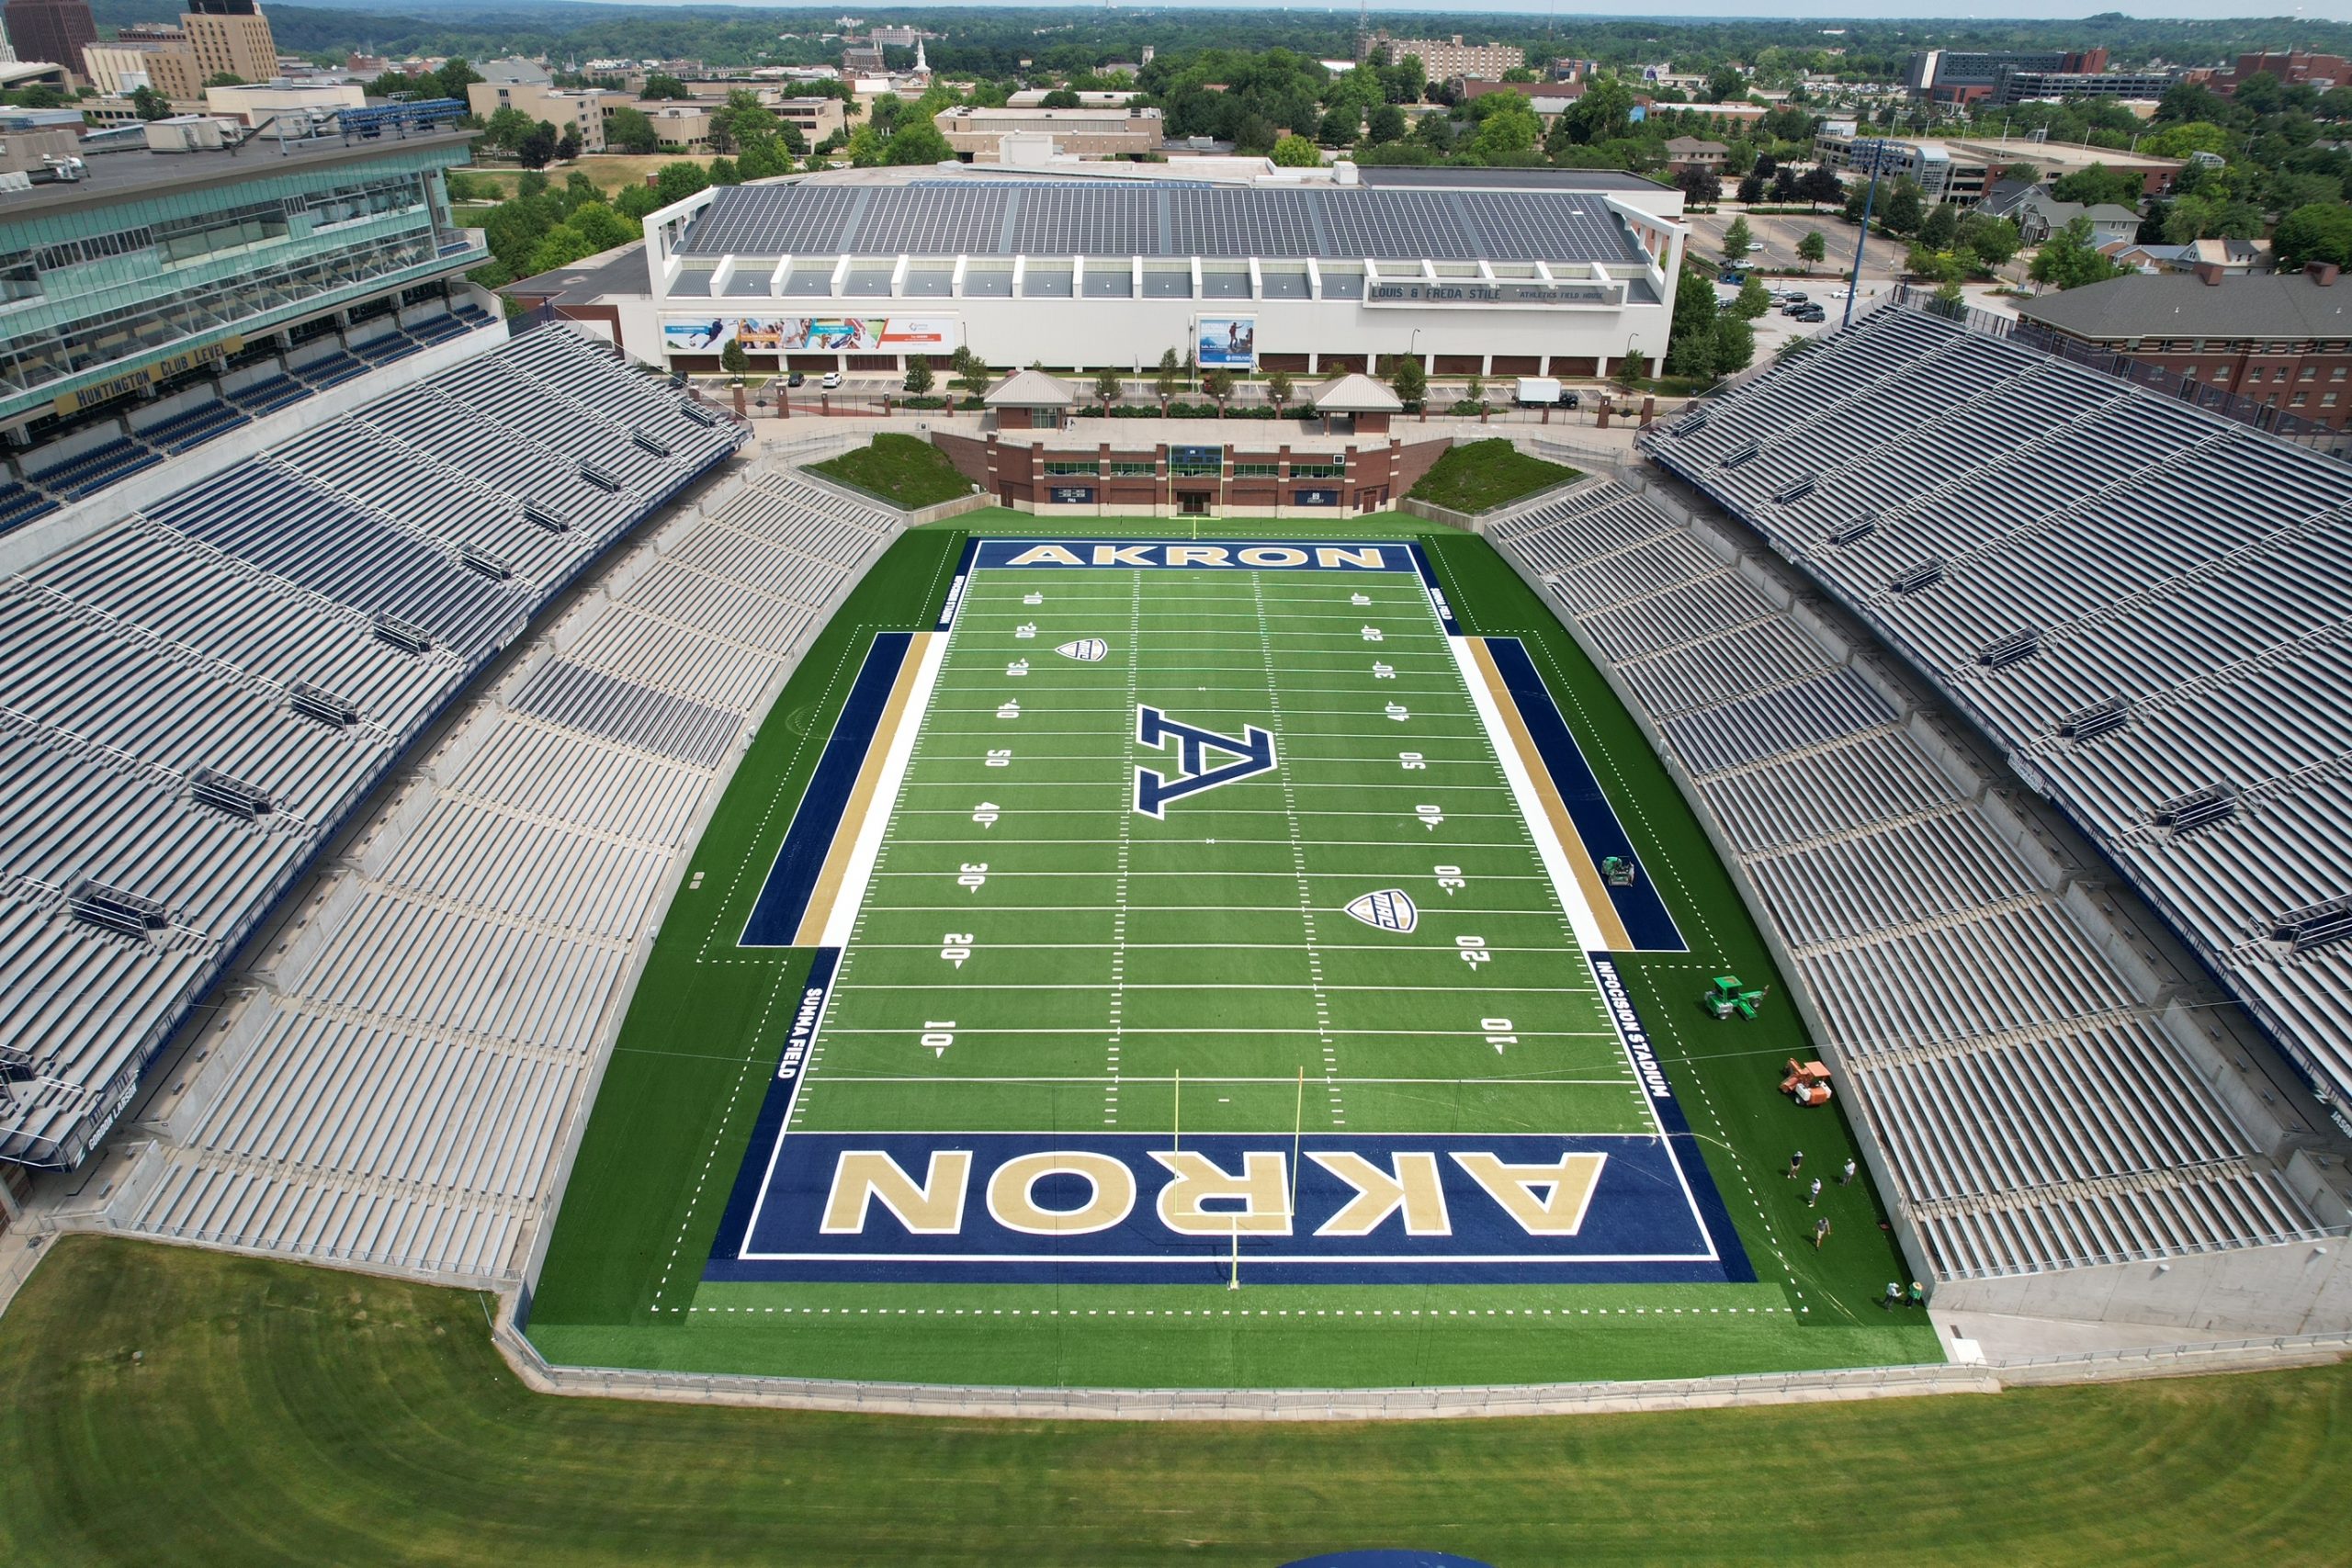 Akron Zips Football Starts the 2022 Season with New AstroTurf and a Branding Refresh - AstroTurf